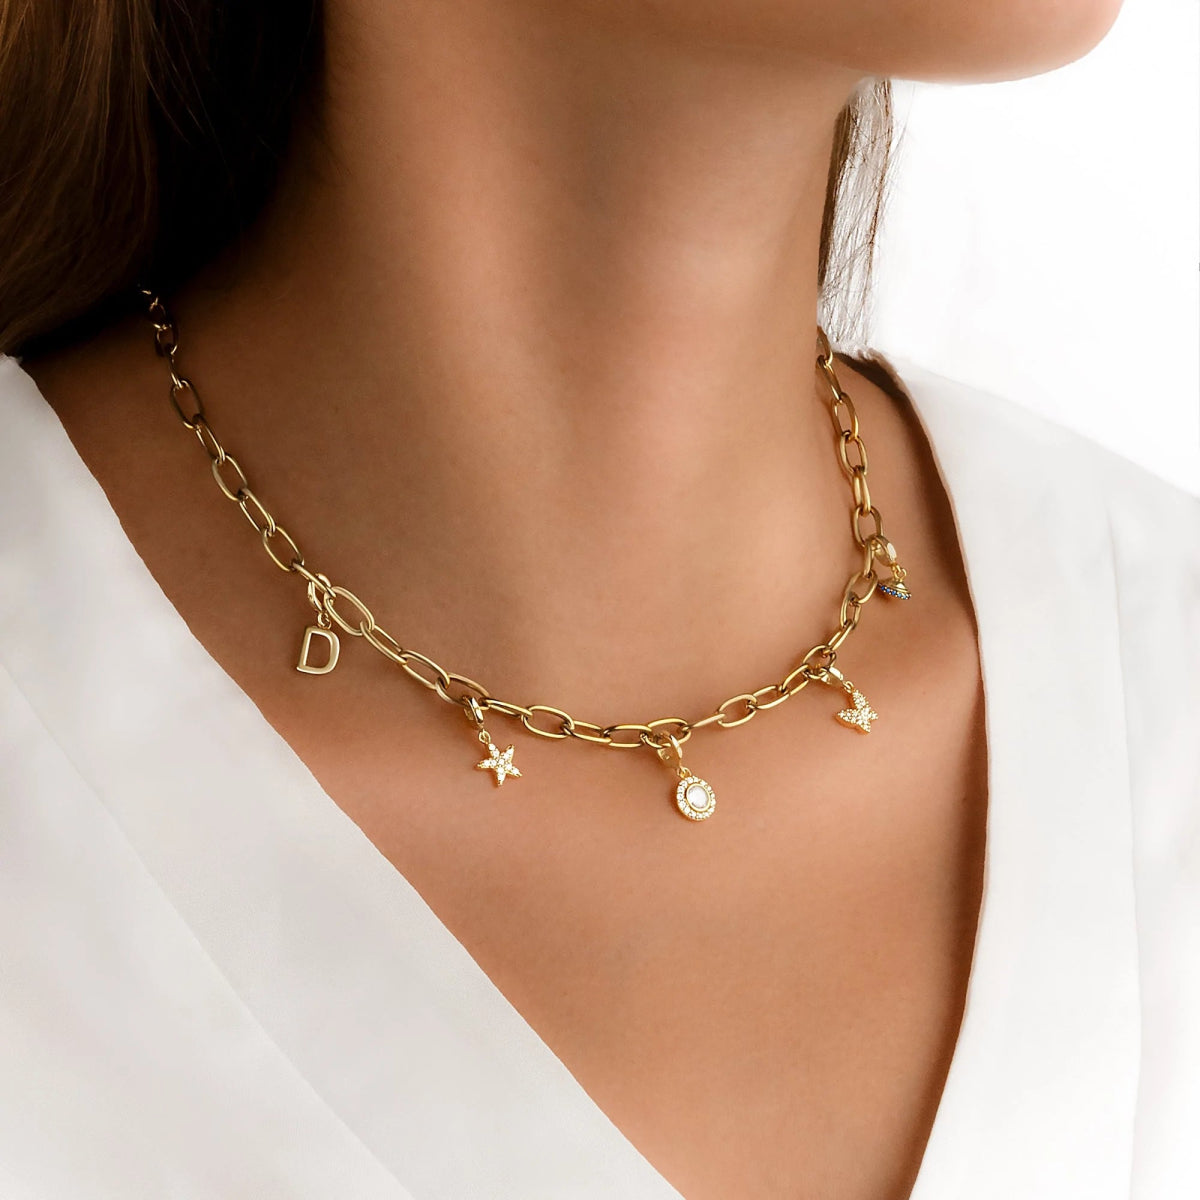 blooming supple necklace gold